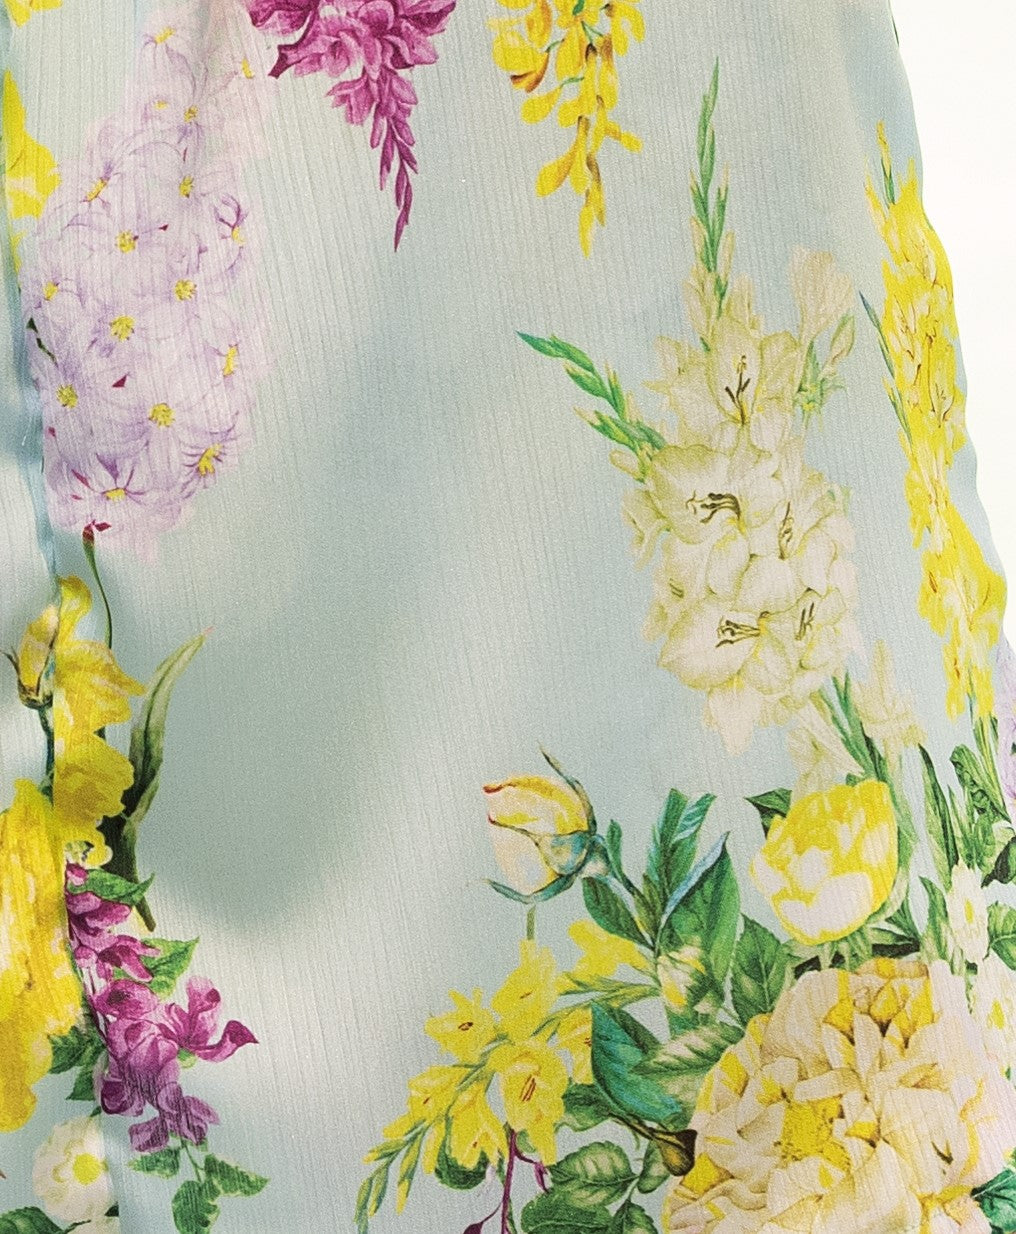 This shorts is inspired by the gardens of Positano in Italy and provides a comfortable fit and sophisticated aesthetic. Its floral detailing and subtle colors create a unique look while its silky fabric ensures trustworthy quality. This versatile garment is suitable for wear as an outfit top, sleepwear, or loungewear.